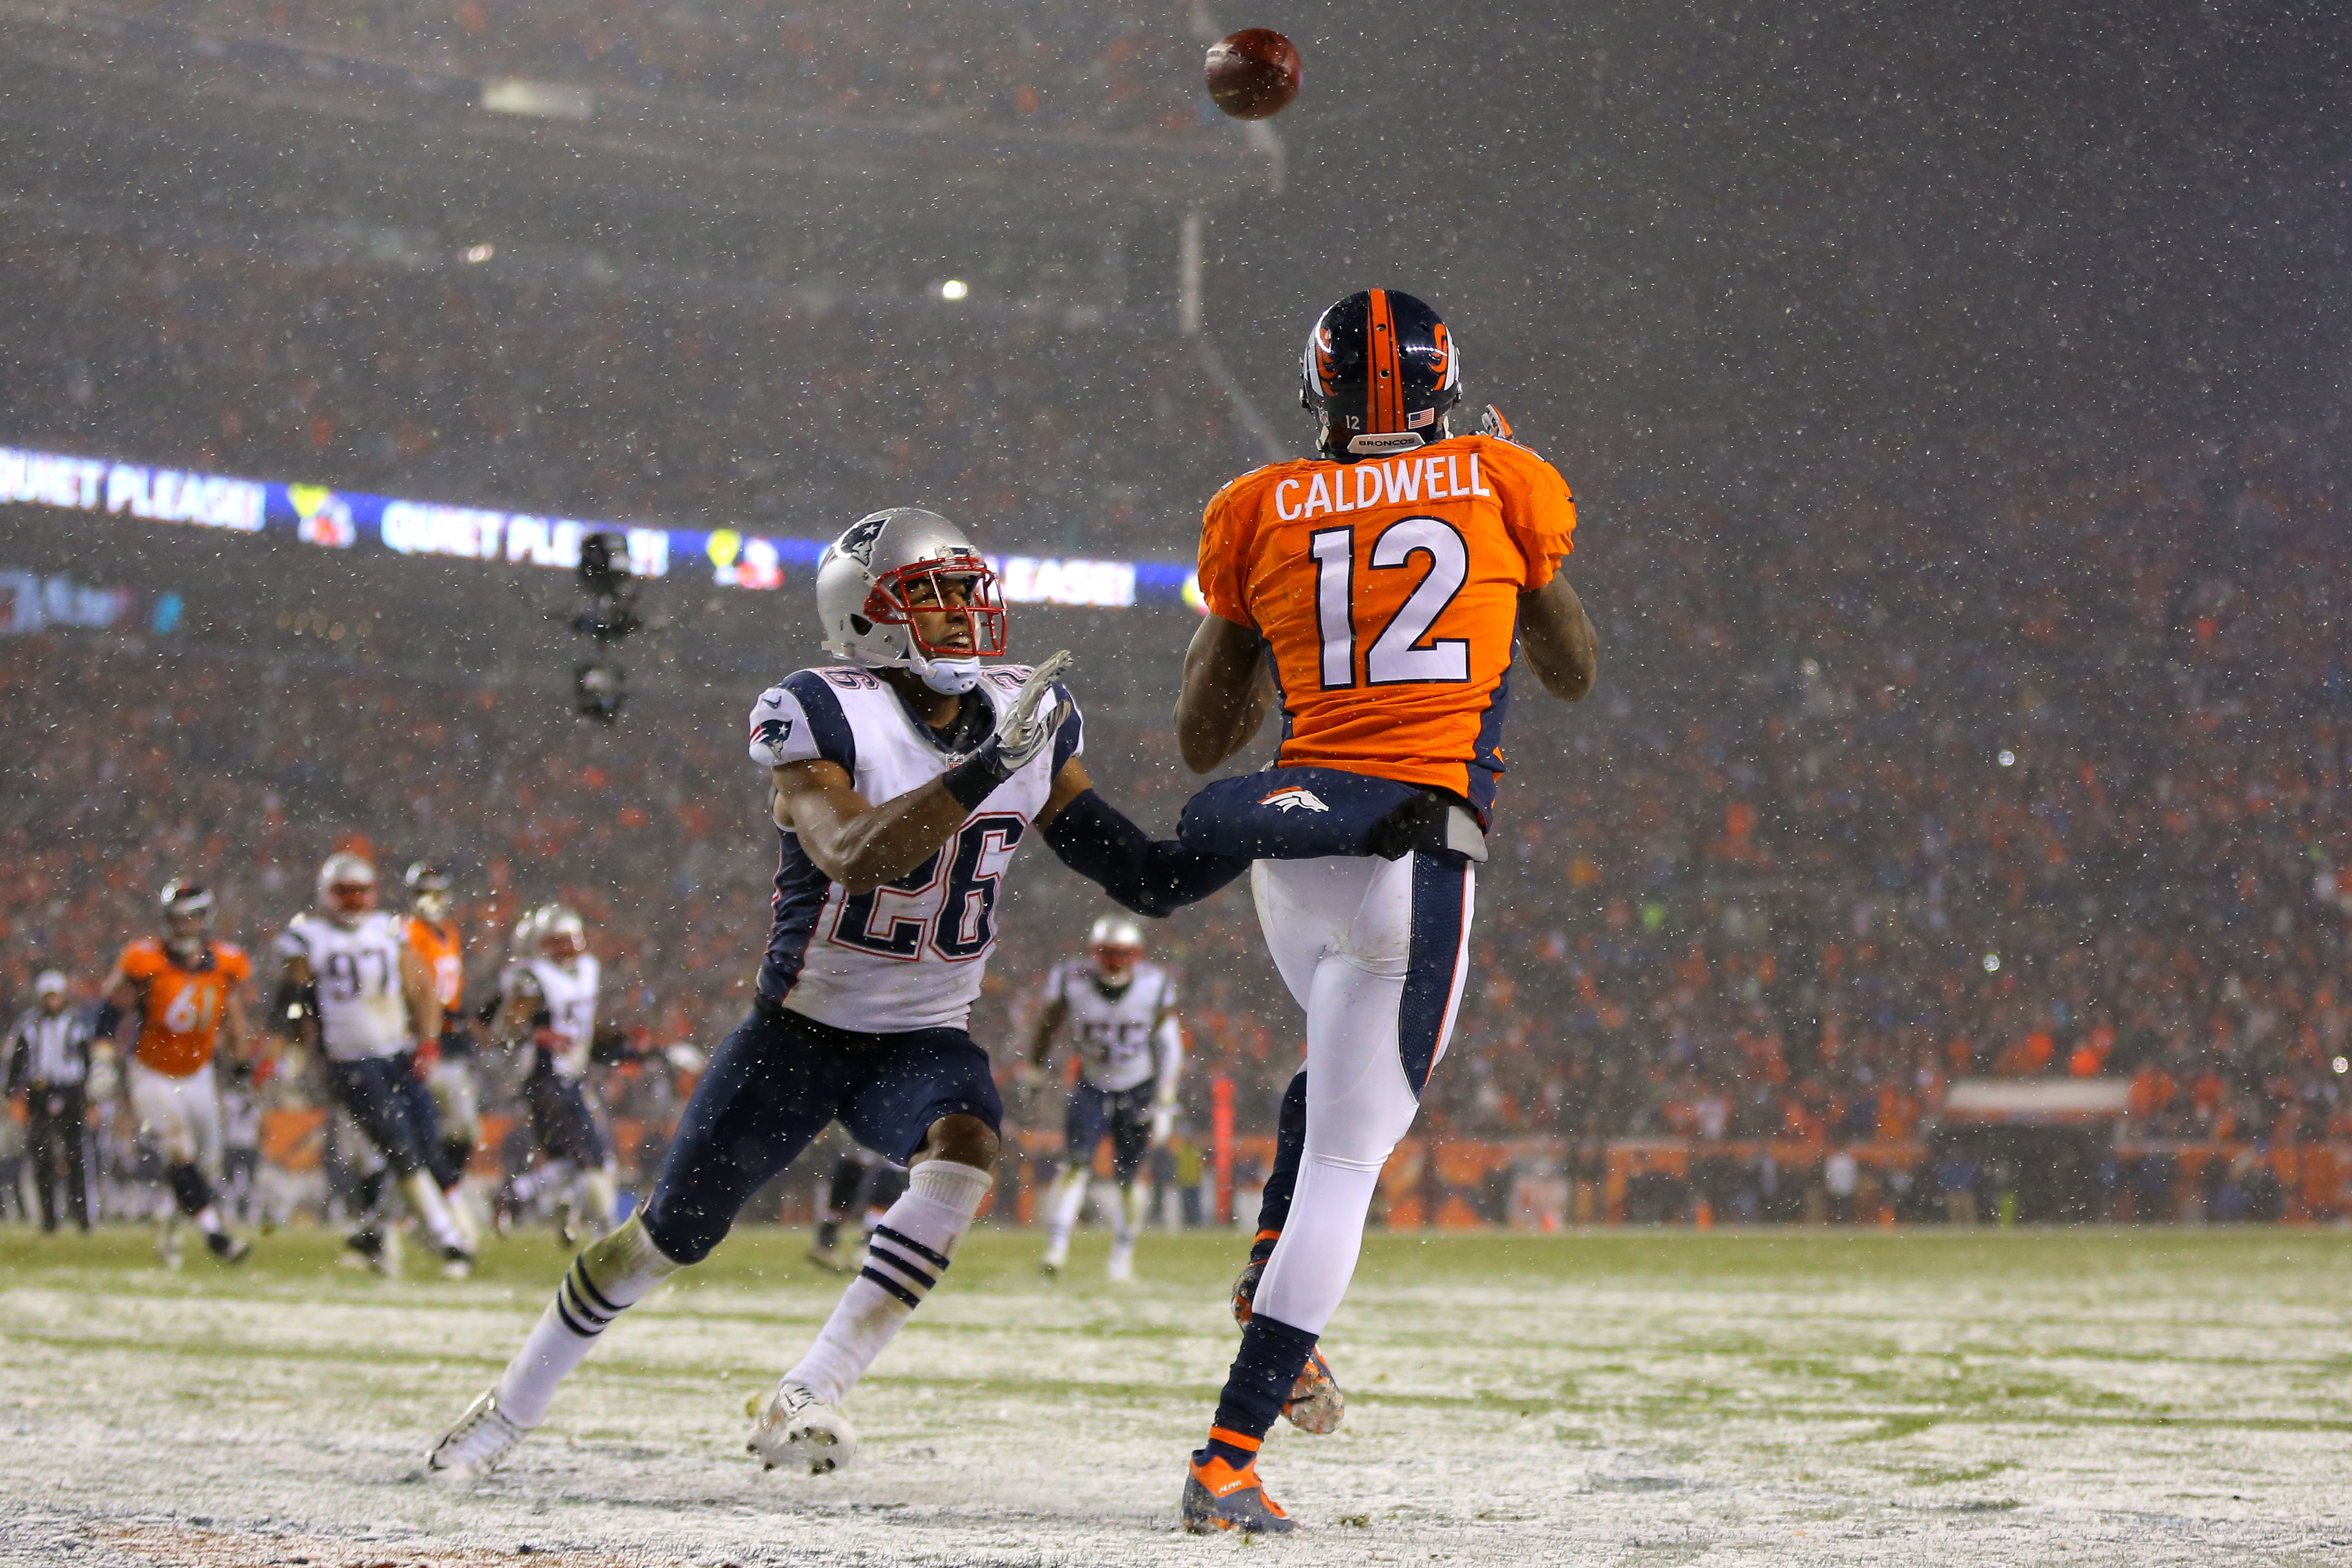 Andrew Caldwell touchdown Patriots snow